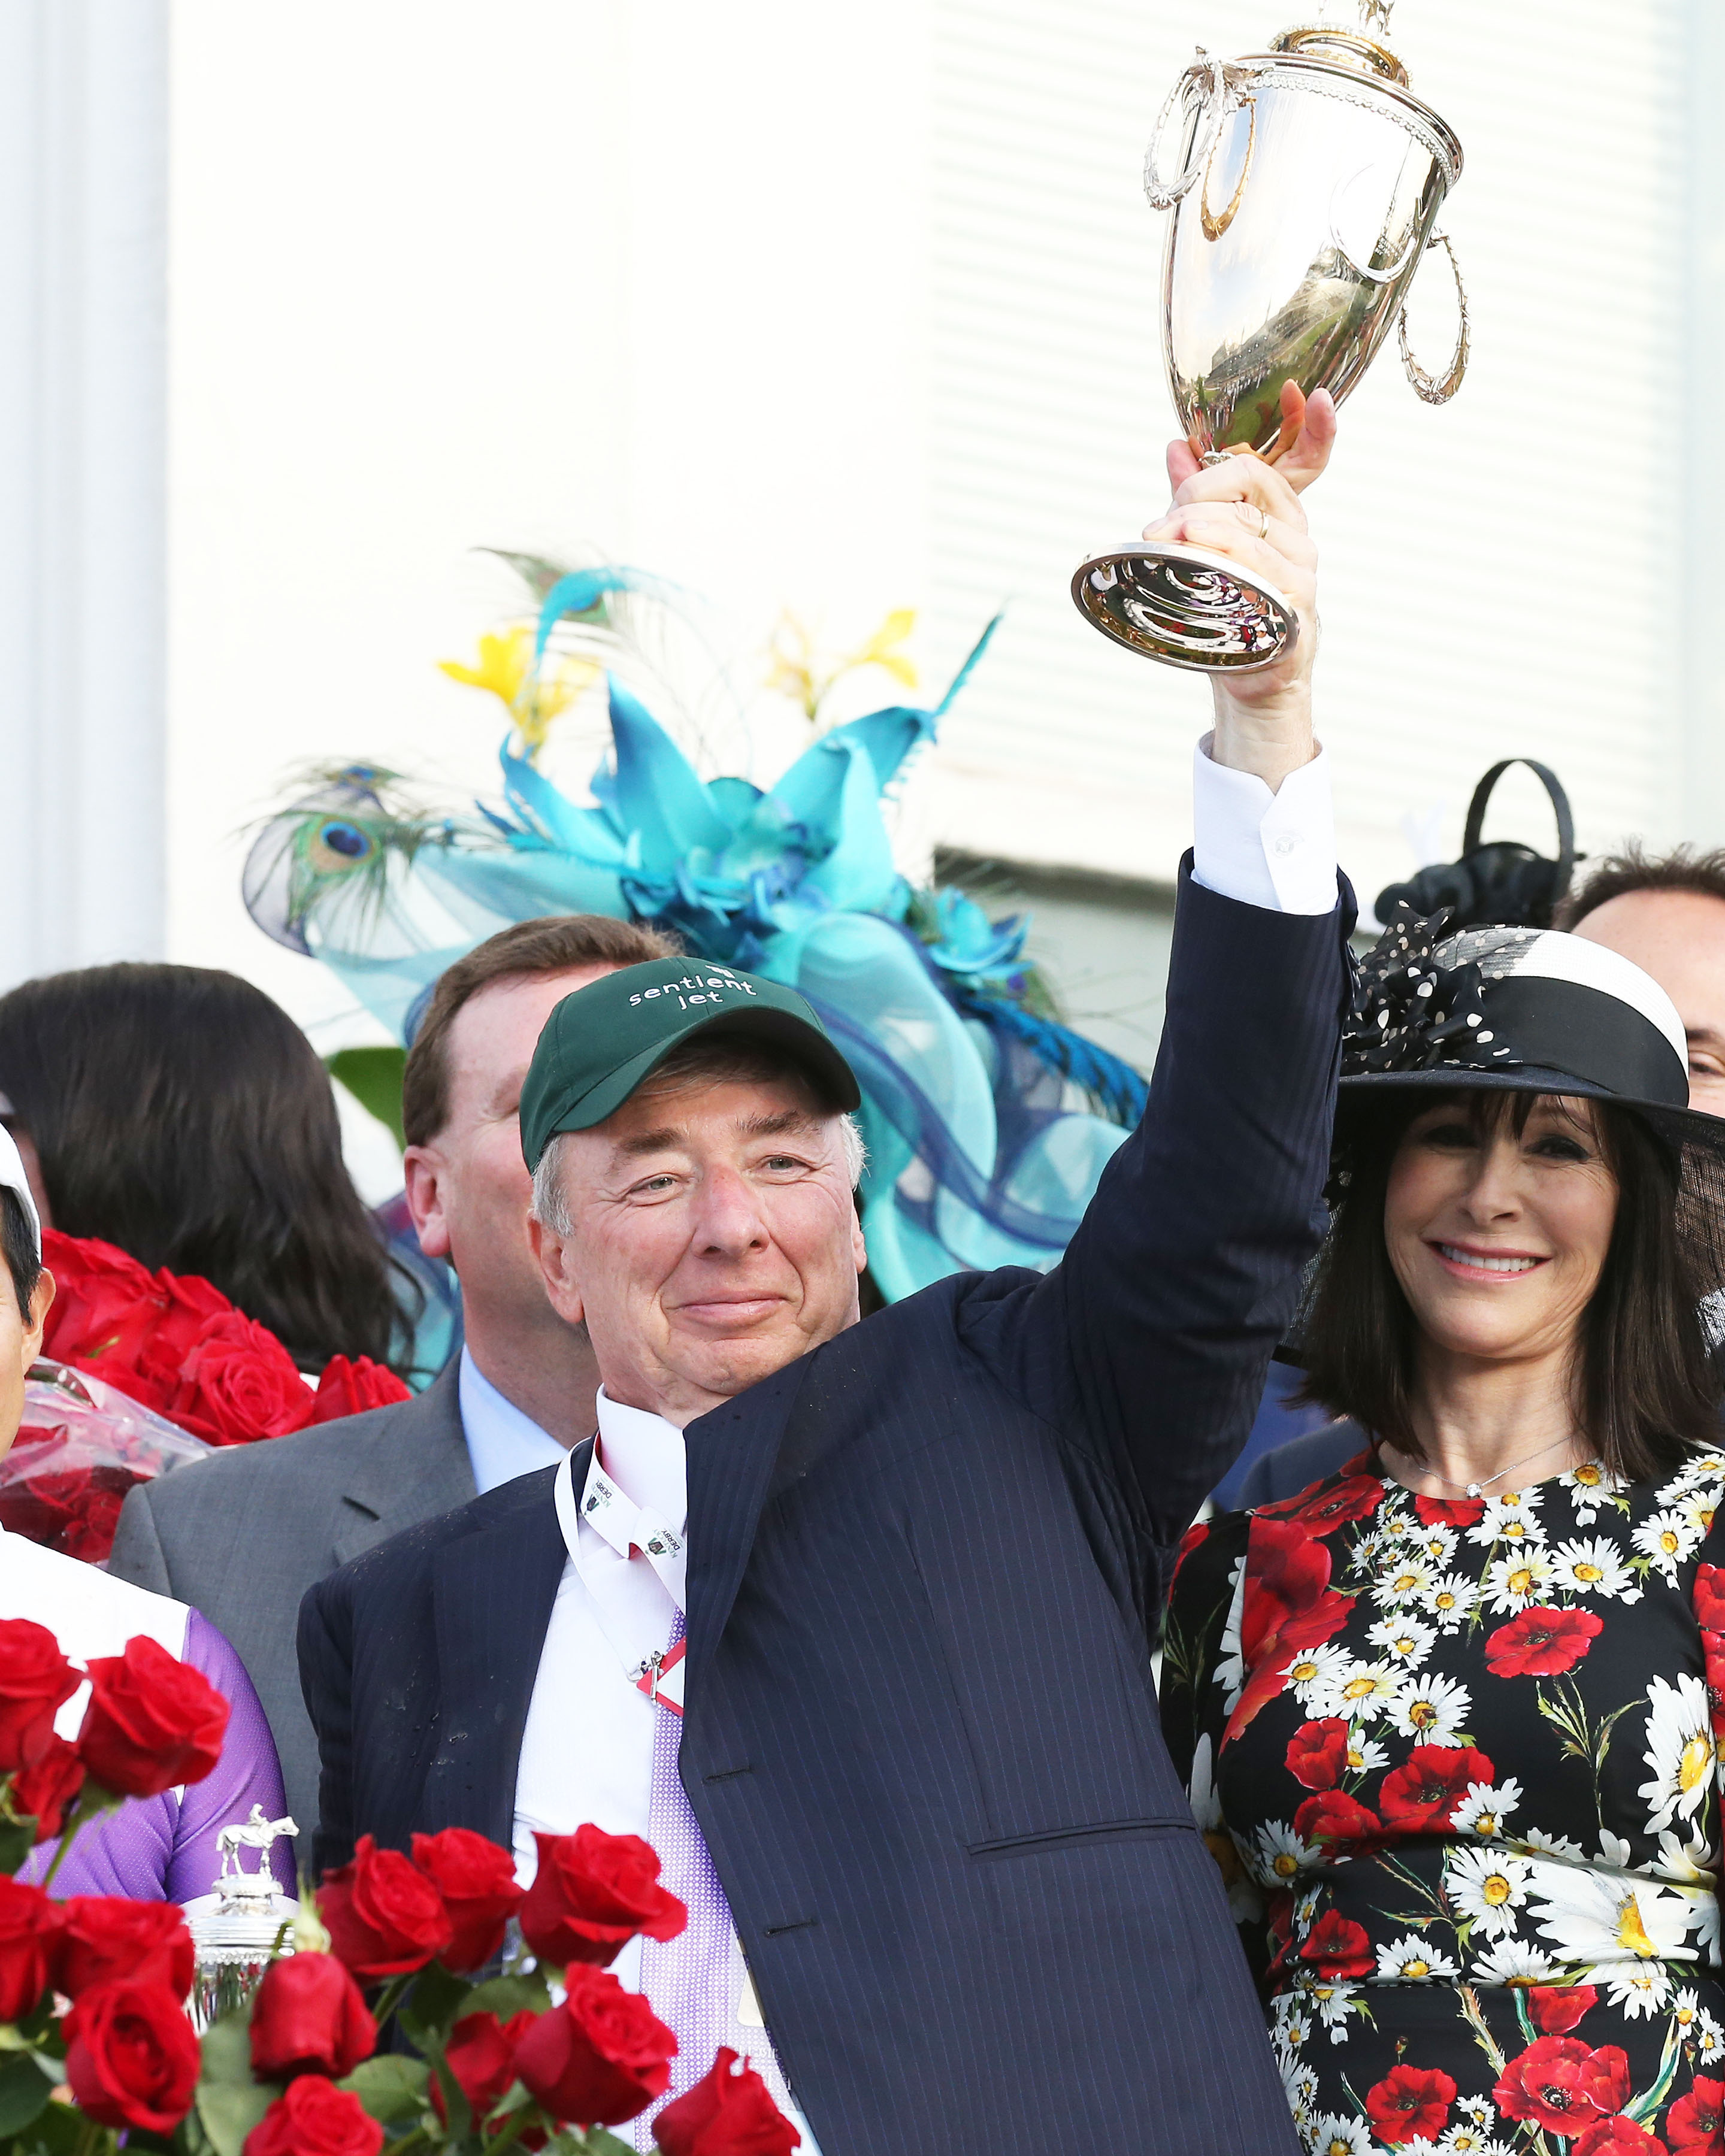 Unforgettable moment: owner Paul Reddam with last year’s Kentucky Derby trophy. Photo: Coady Photography